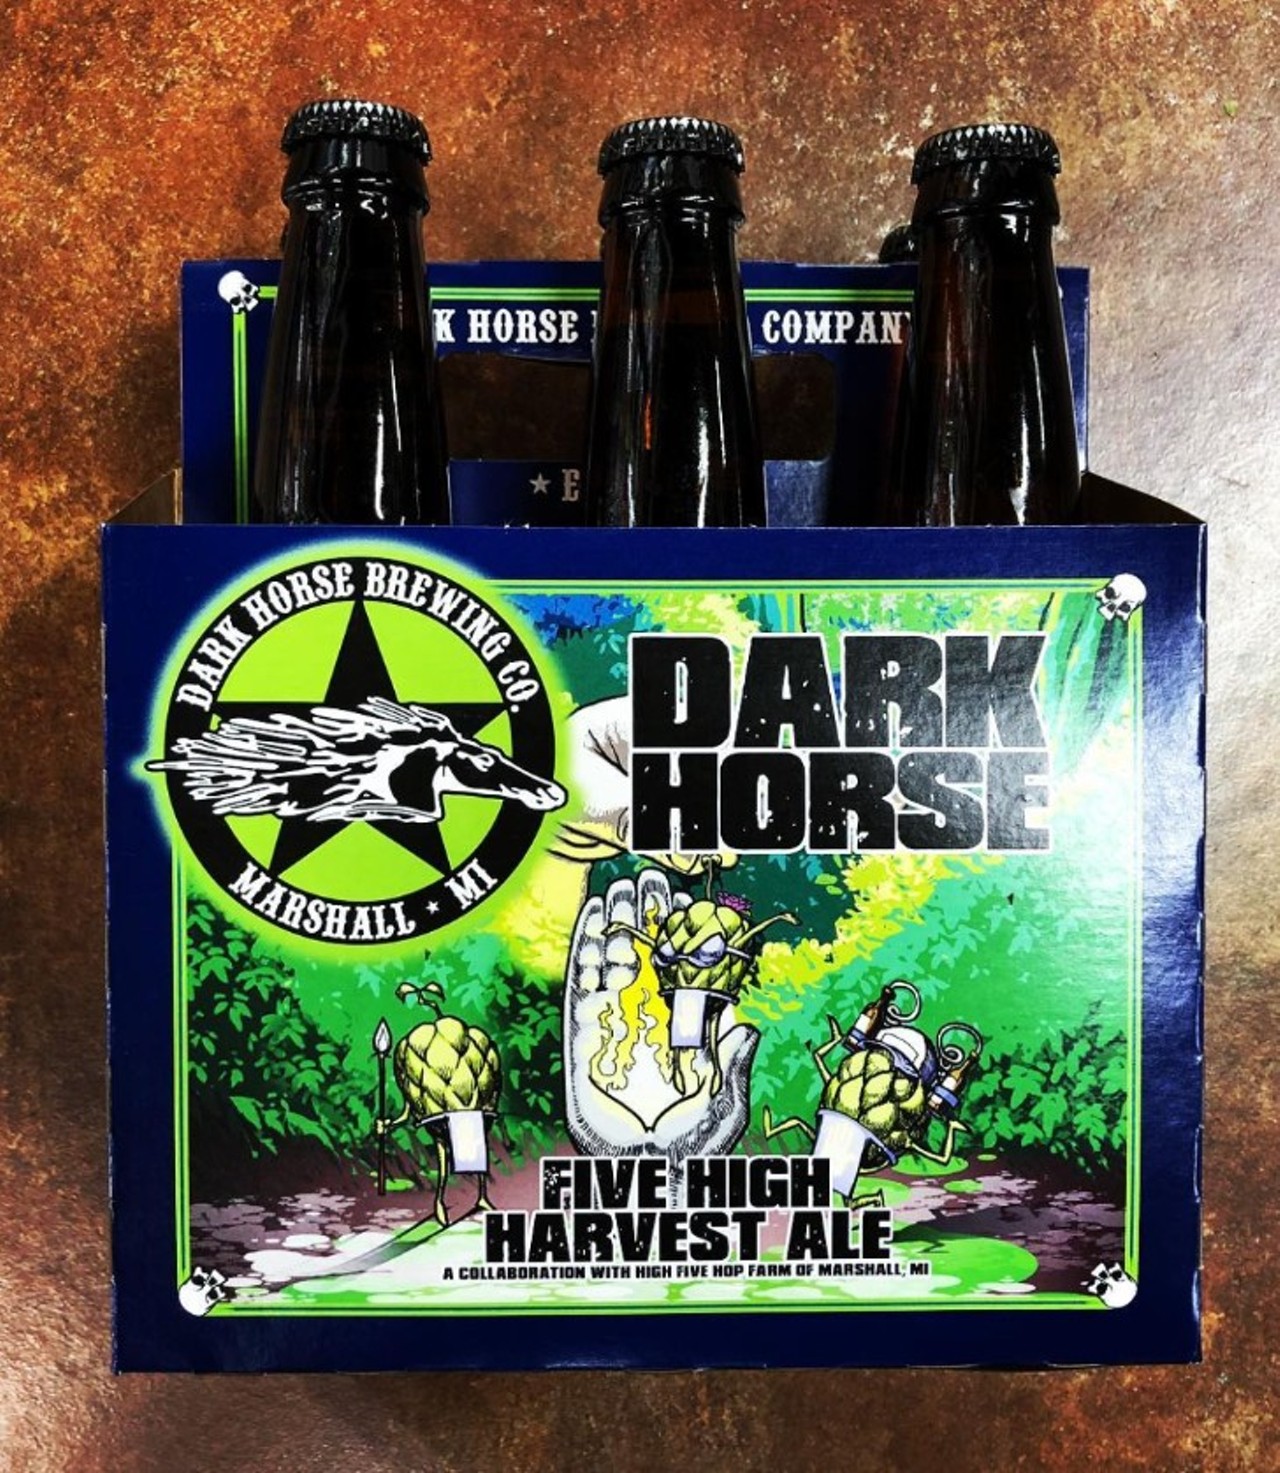 Dark Horse&#146;s Five High Harvest Ale
Marshall - 6%
This hop-heavy IPA blends Cascade, Chinook, and Challenger hops using a wet hop method making this brew super juicy.
Photo courtesy of @beer.world